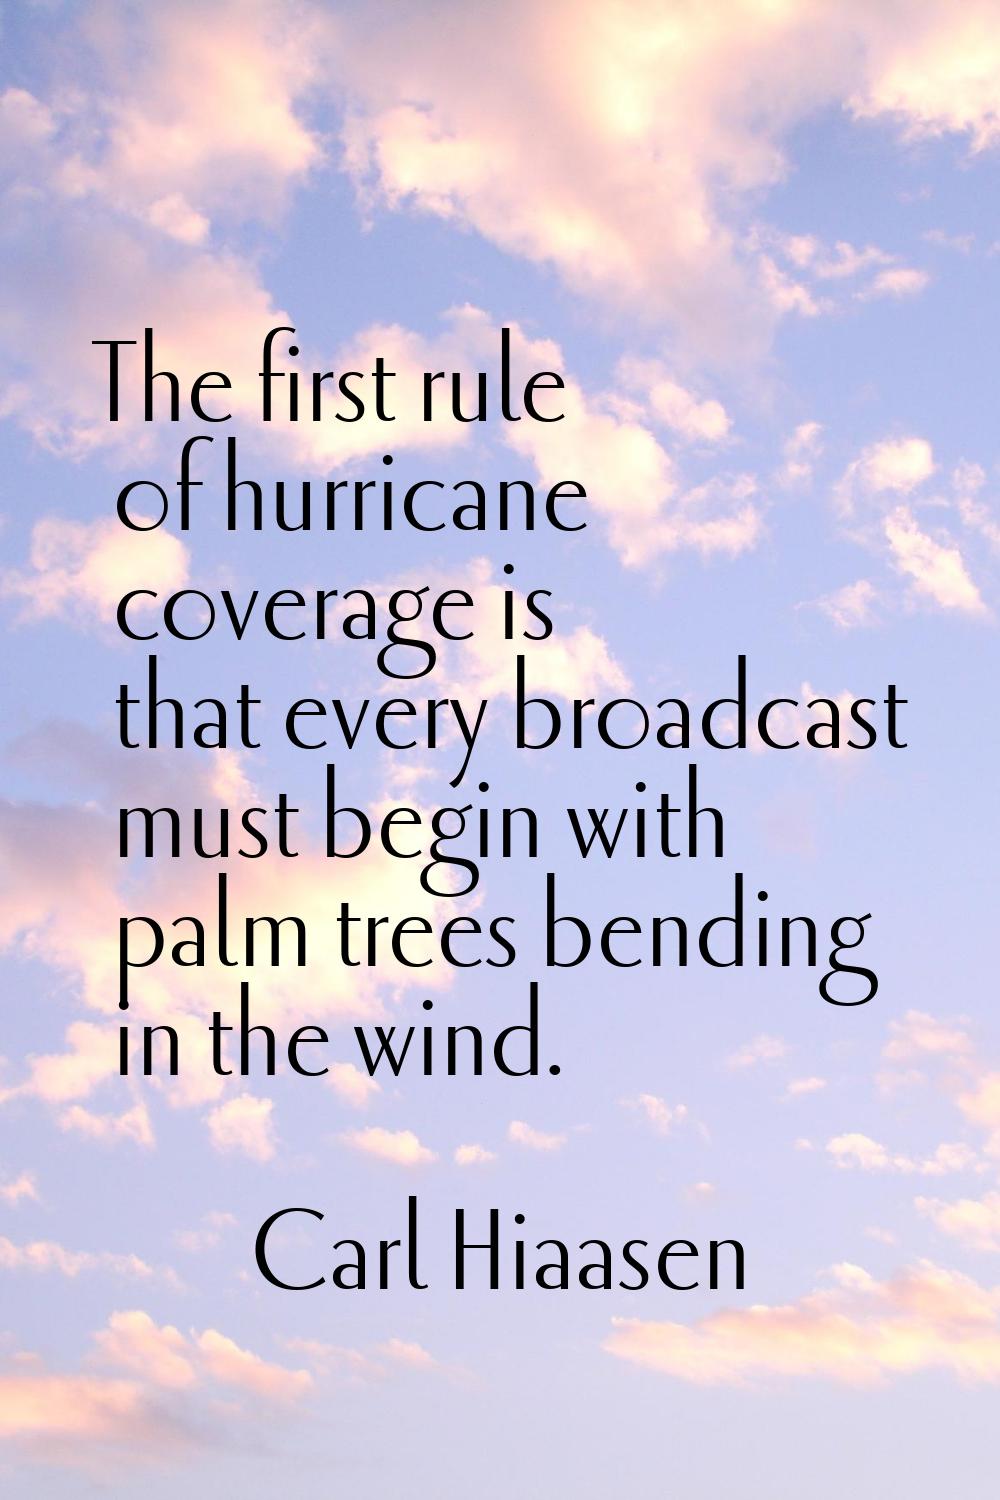 The first rule of hurricane coverage is that every broadcast must begin with palm trees bending in 